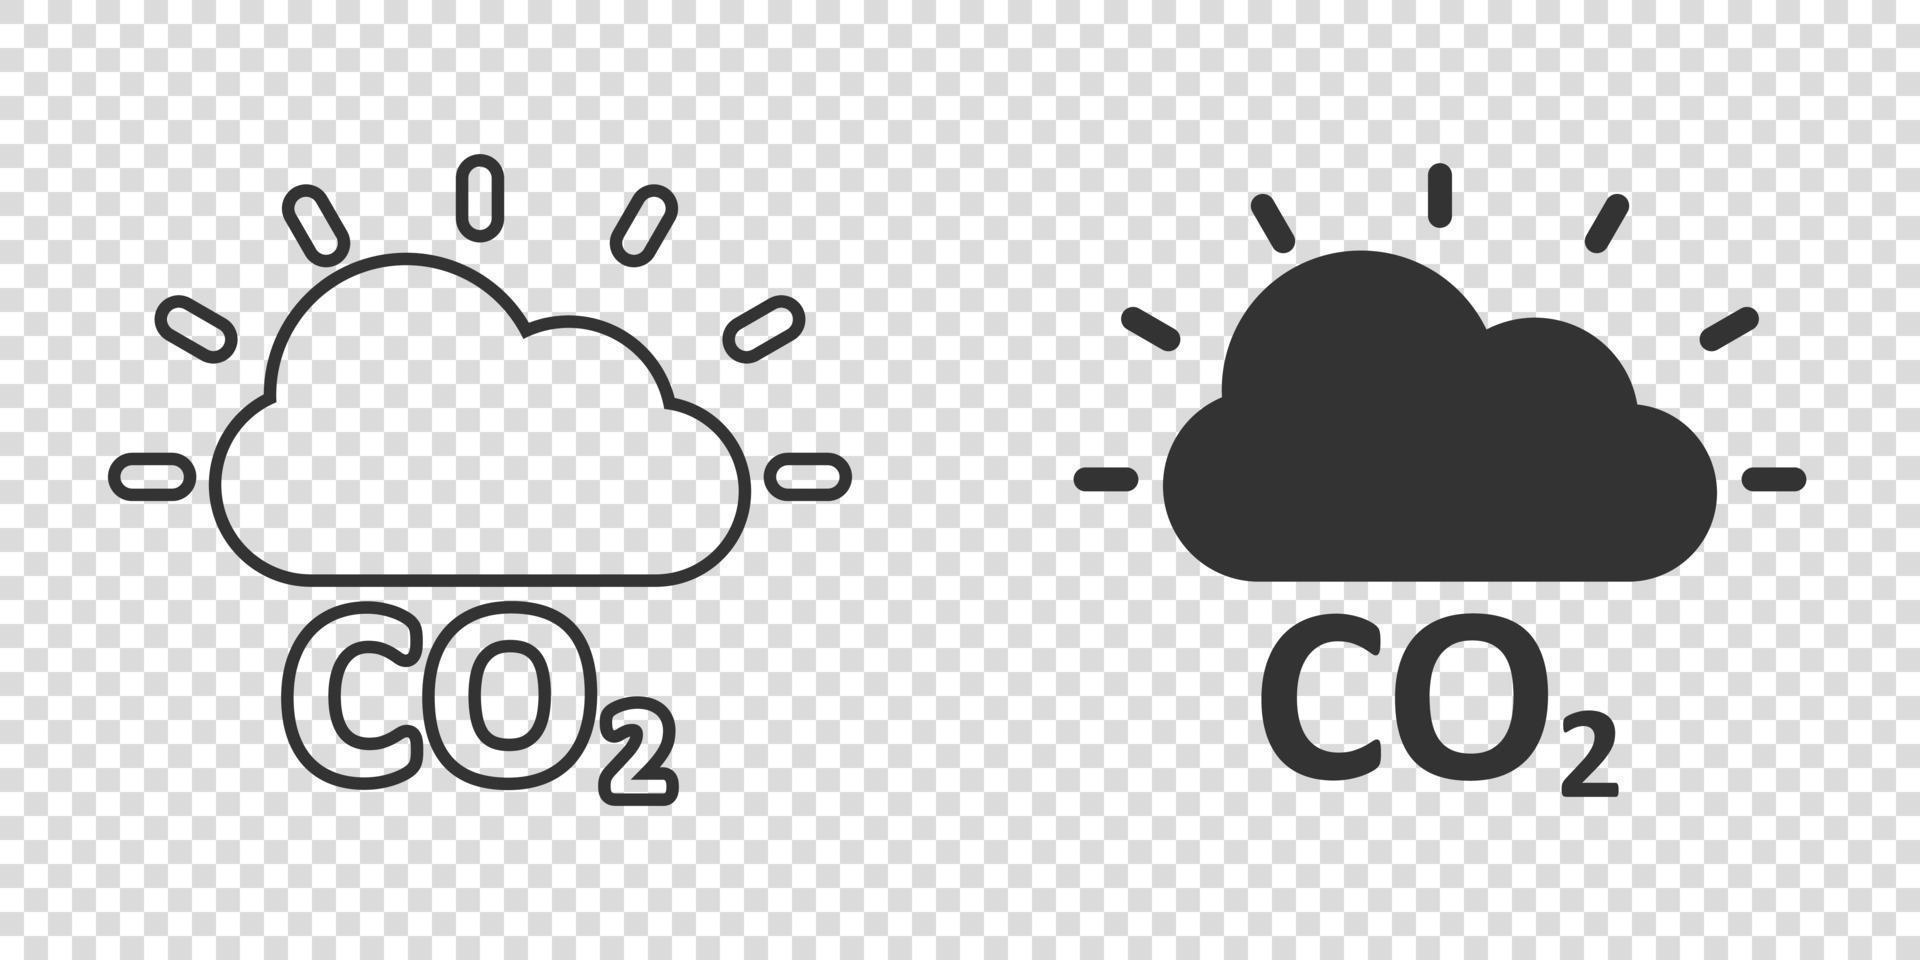 Co2 emission icon in flat style. Cloud disaster vector illustration on white isolated background. Environment sign business concept.